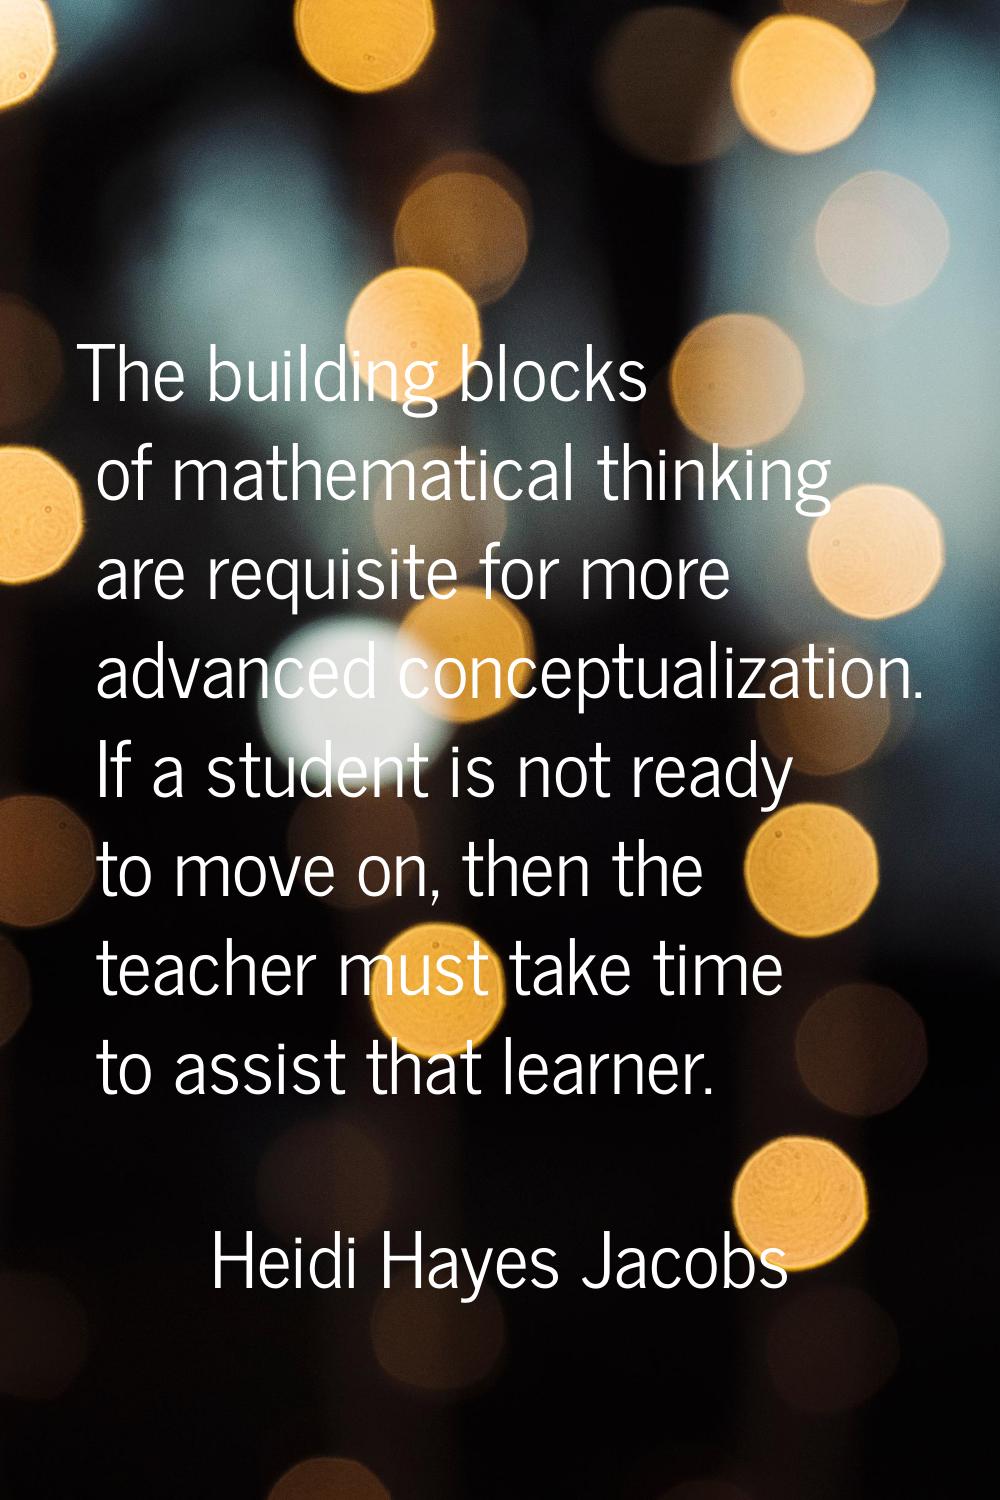 The building blocks of mathematical thinking are requisite for more advanced conceptualization. If 